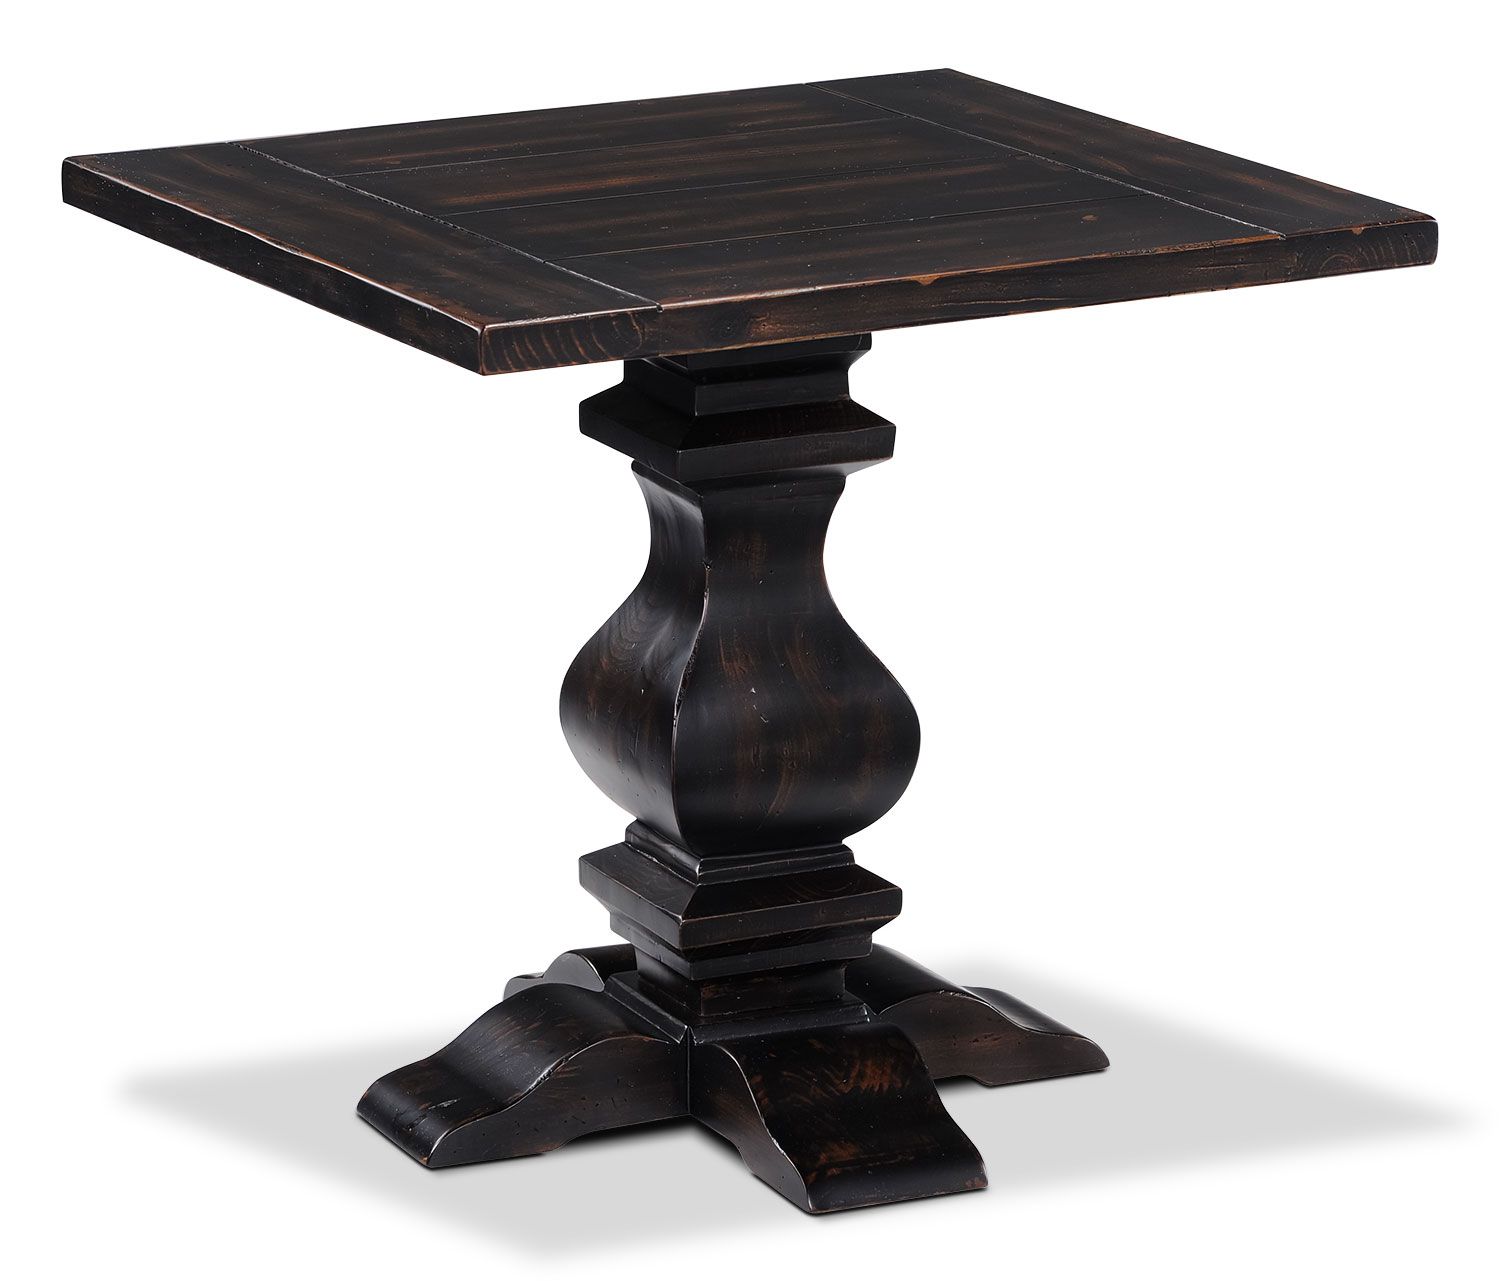 accent and occasional furniture rossignton end table ebony small rectangular magnussen rossington wood handsomely classic strong this has the look glass sofa side wooden cabinet